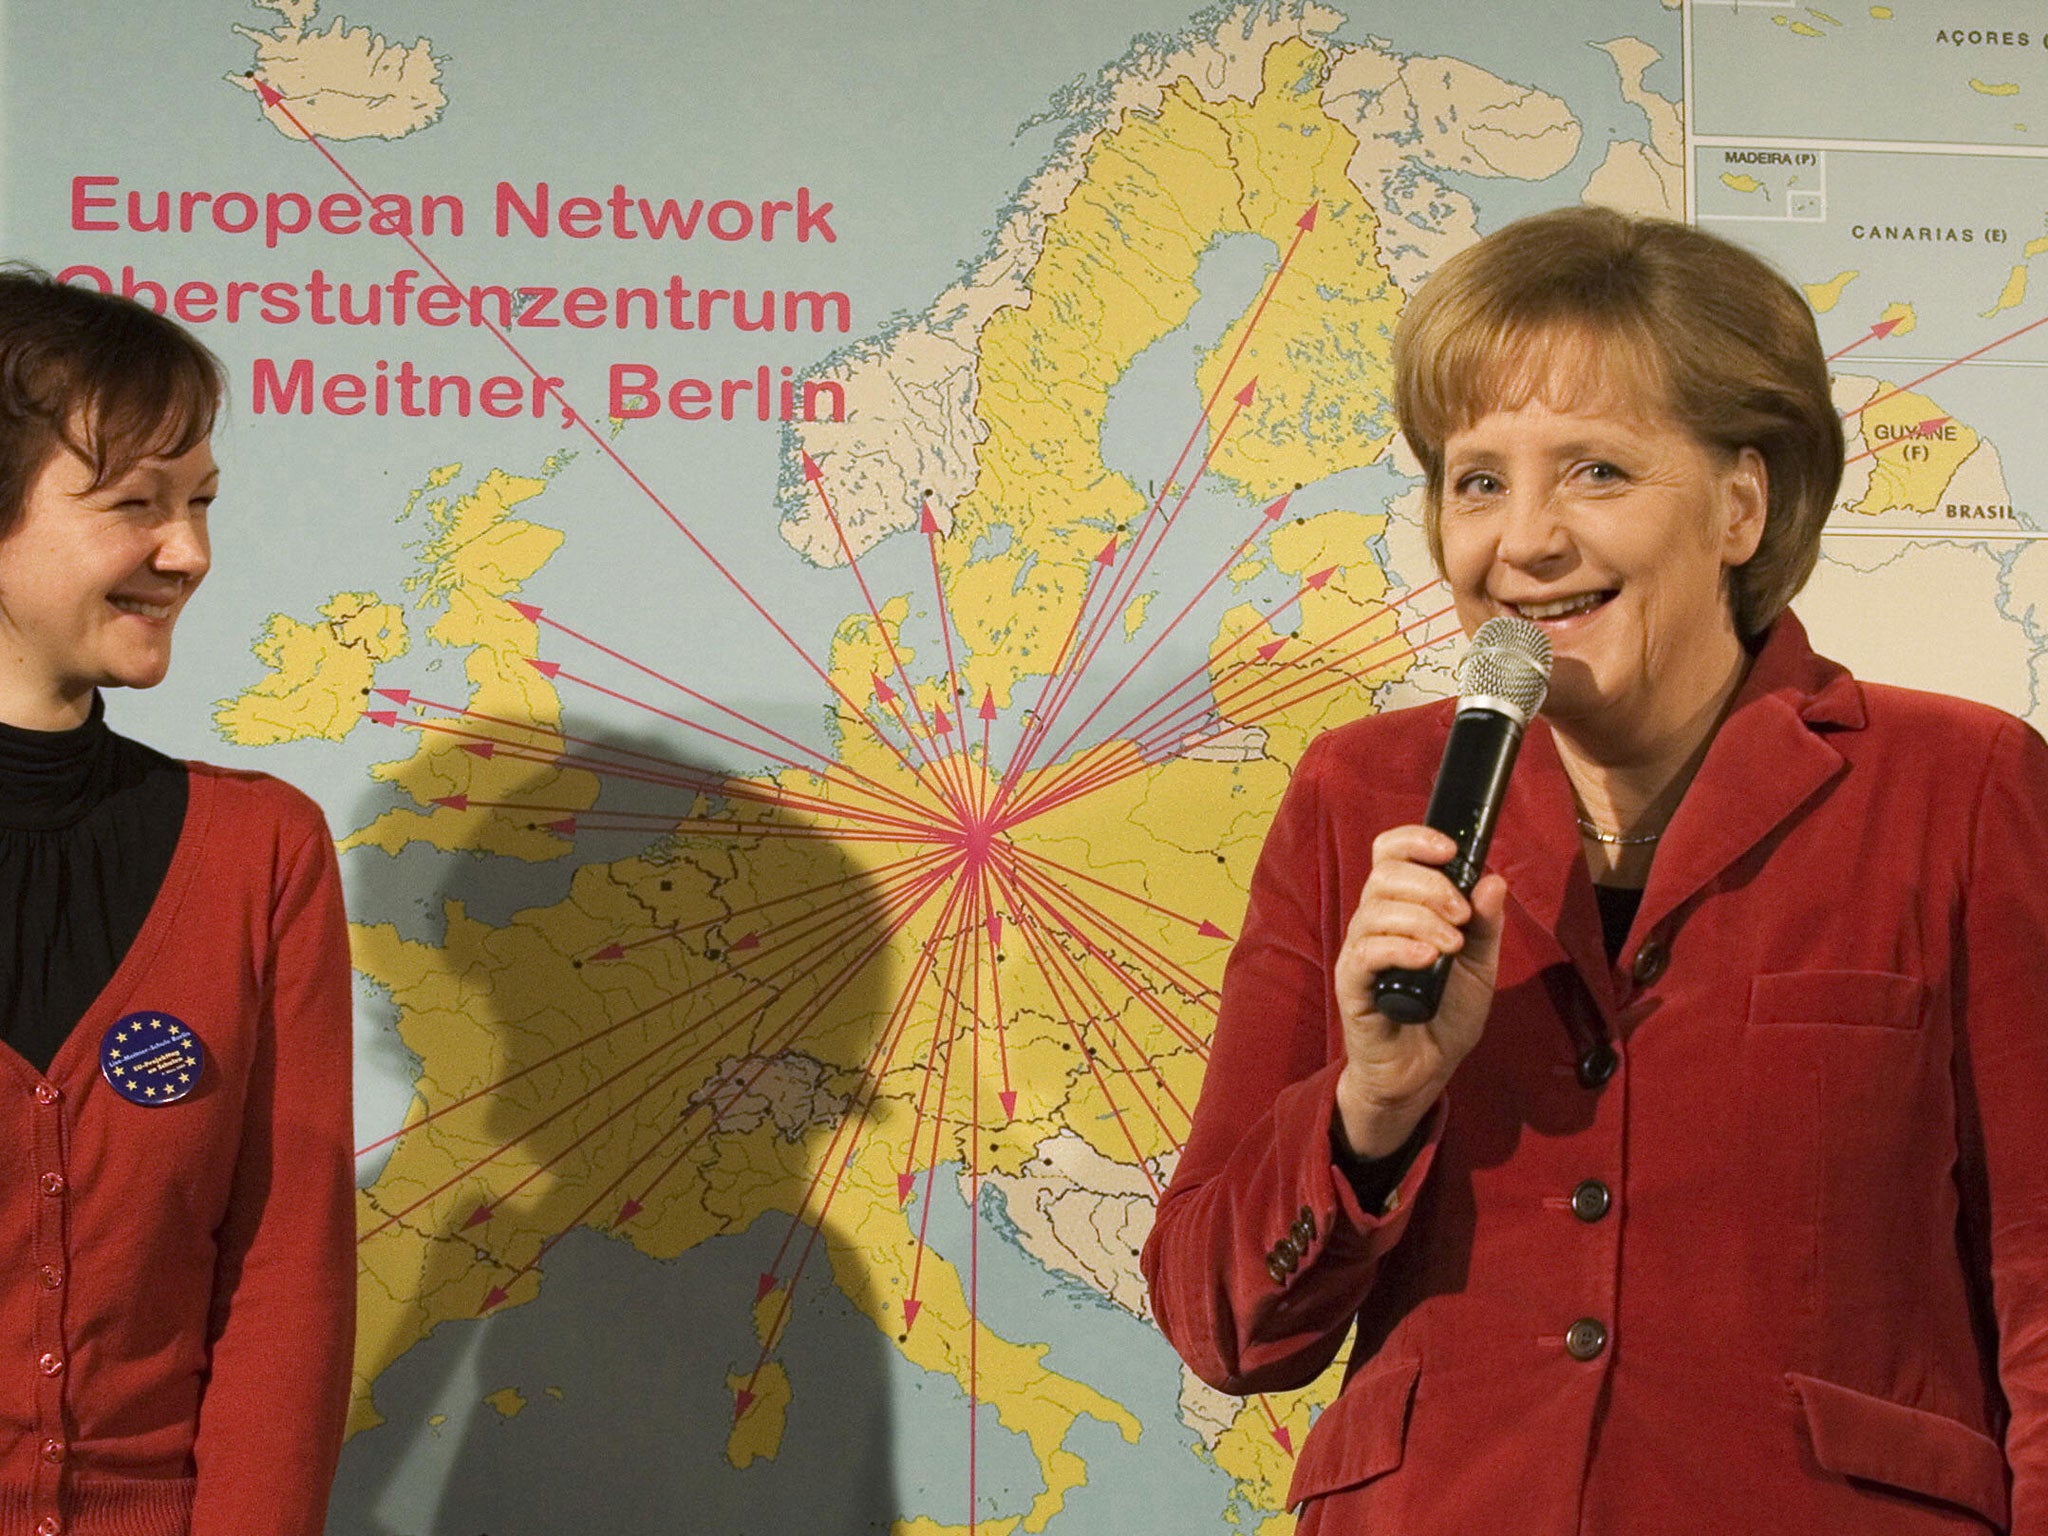 German Chancellor Angela Merkel (R) and Anja Schabanowski, former student of Berlin's Lise-Meitner-School, stand in front of a map of Europe on March 9, 2009 in Berlin.